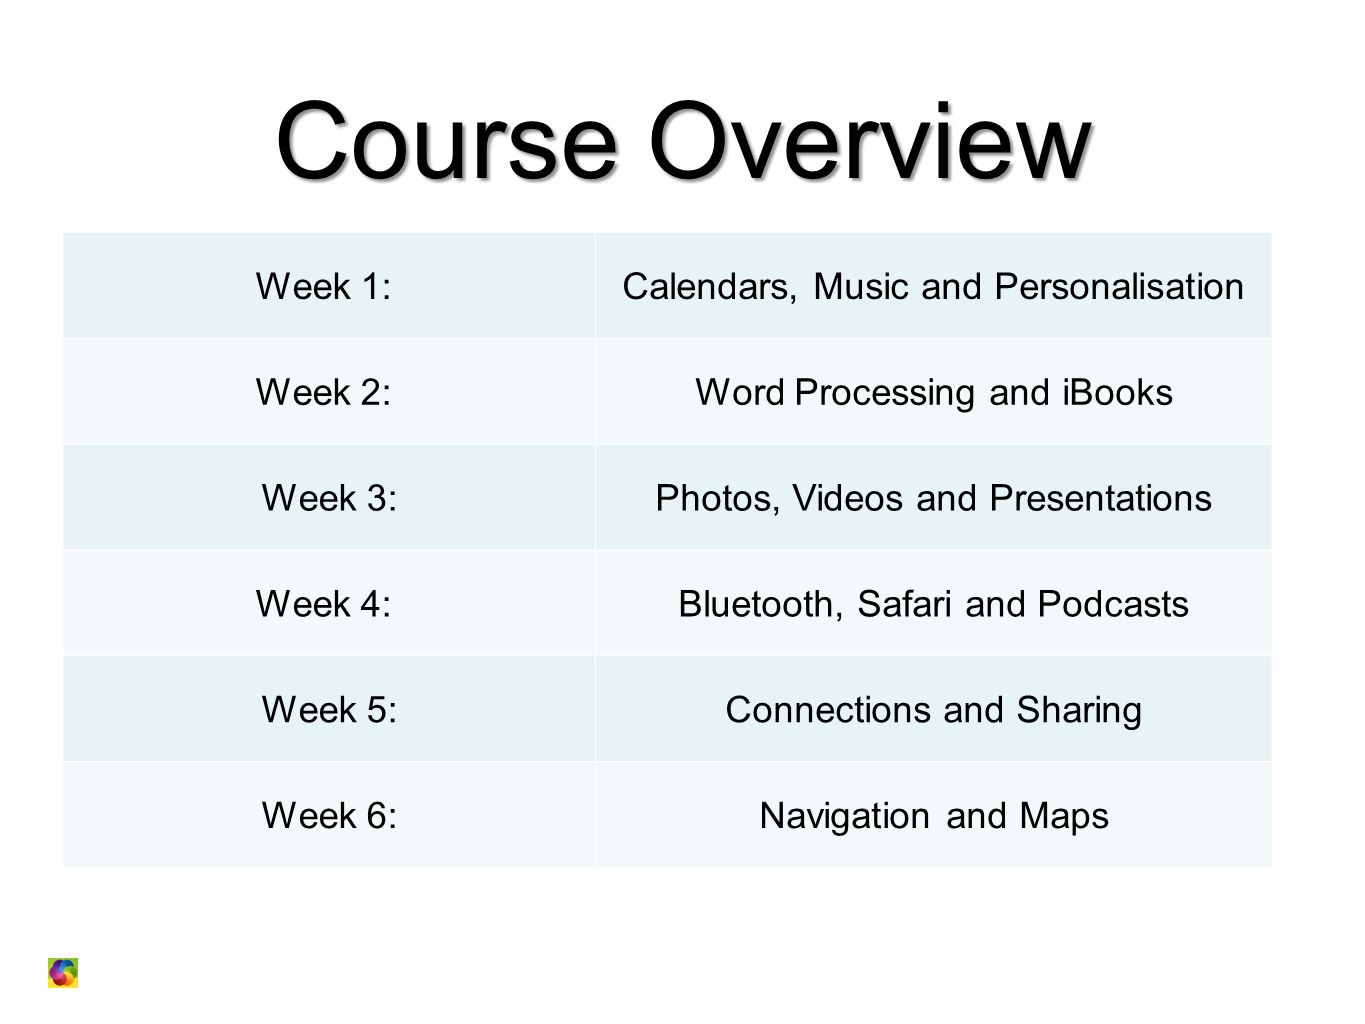 Course Overview Week 1: Calendars, Music and Personalisation Week 2: Word Processing and iBooks Week 3:Photos, Videos and Presentations Week 4: Bluetooth, Safari and Podcasts Week 5:Connections and Sharing Week 6:Navigation and Maps